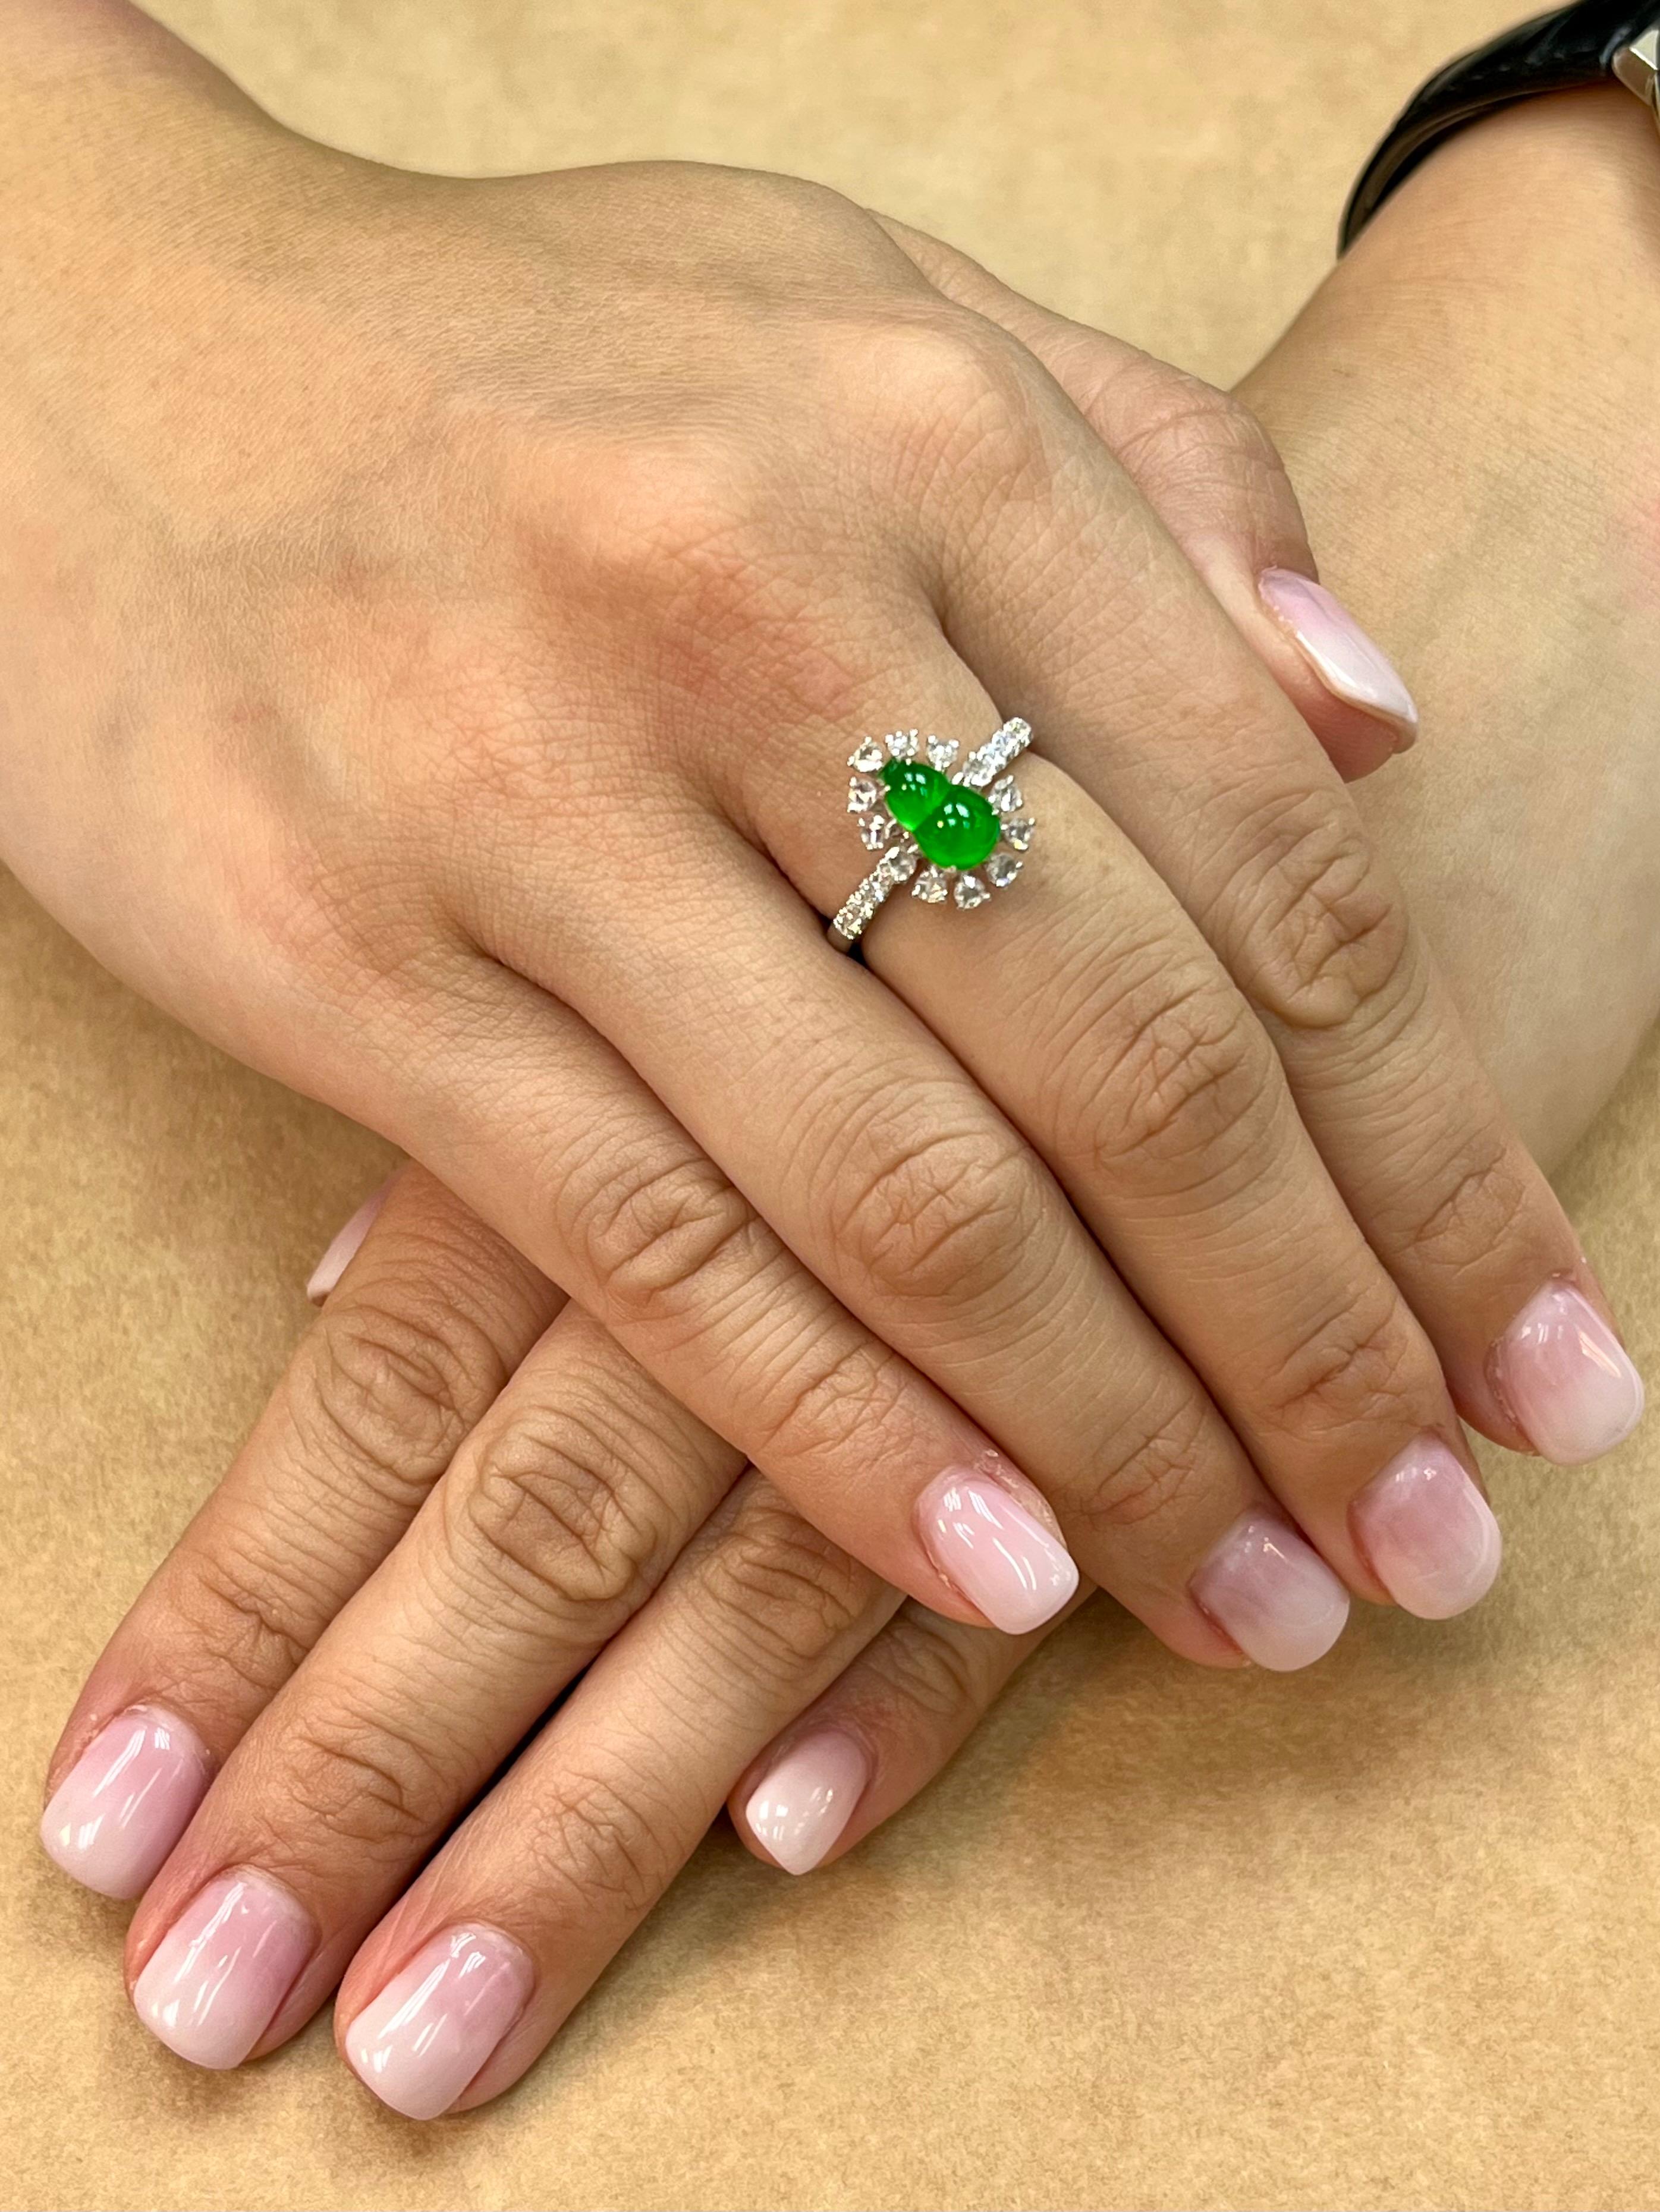 Please check out the HD video. Here is an imperial green Jade ring. This jade and diamond cocktail ring has maximum glow. It is certified by 2 labs The jade gourd represents the Fulu double, it protects people's happiness. It also means 